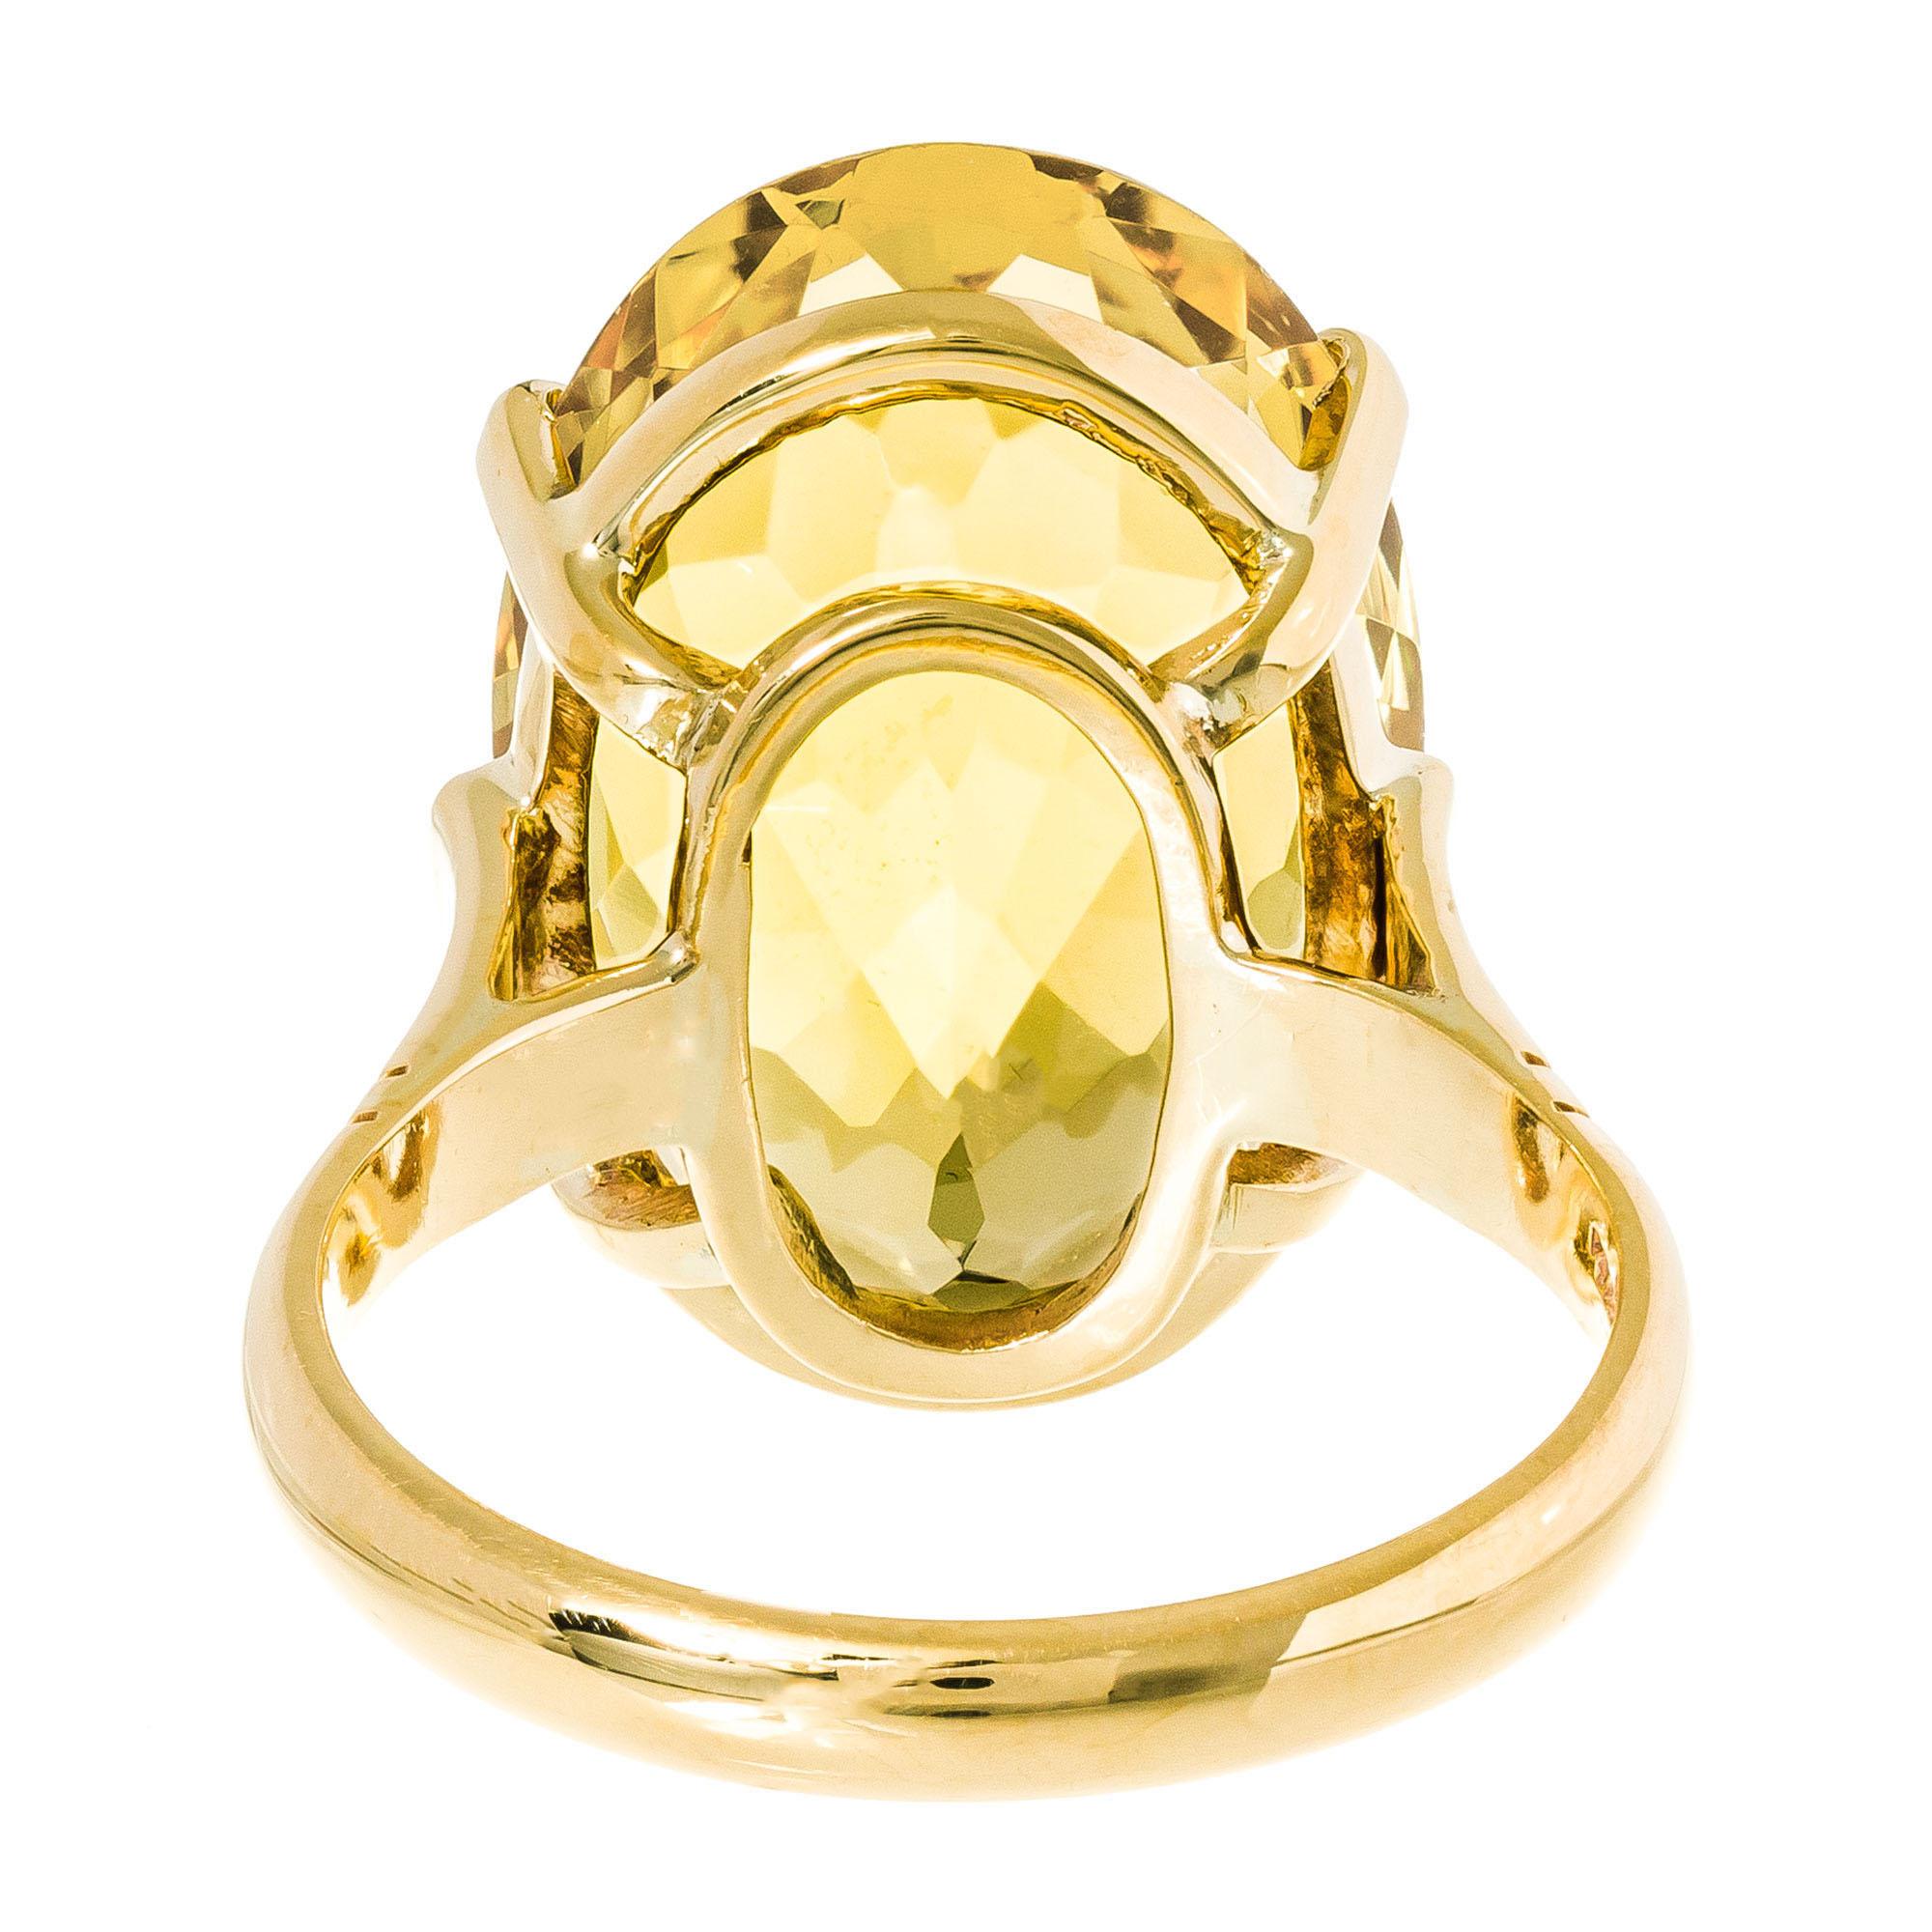 Oval Cut 11.25 Carat Oval Citrine Yellow Gold Cocktail Ring